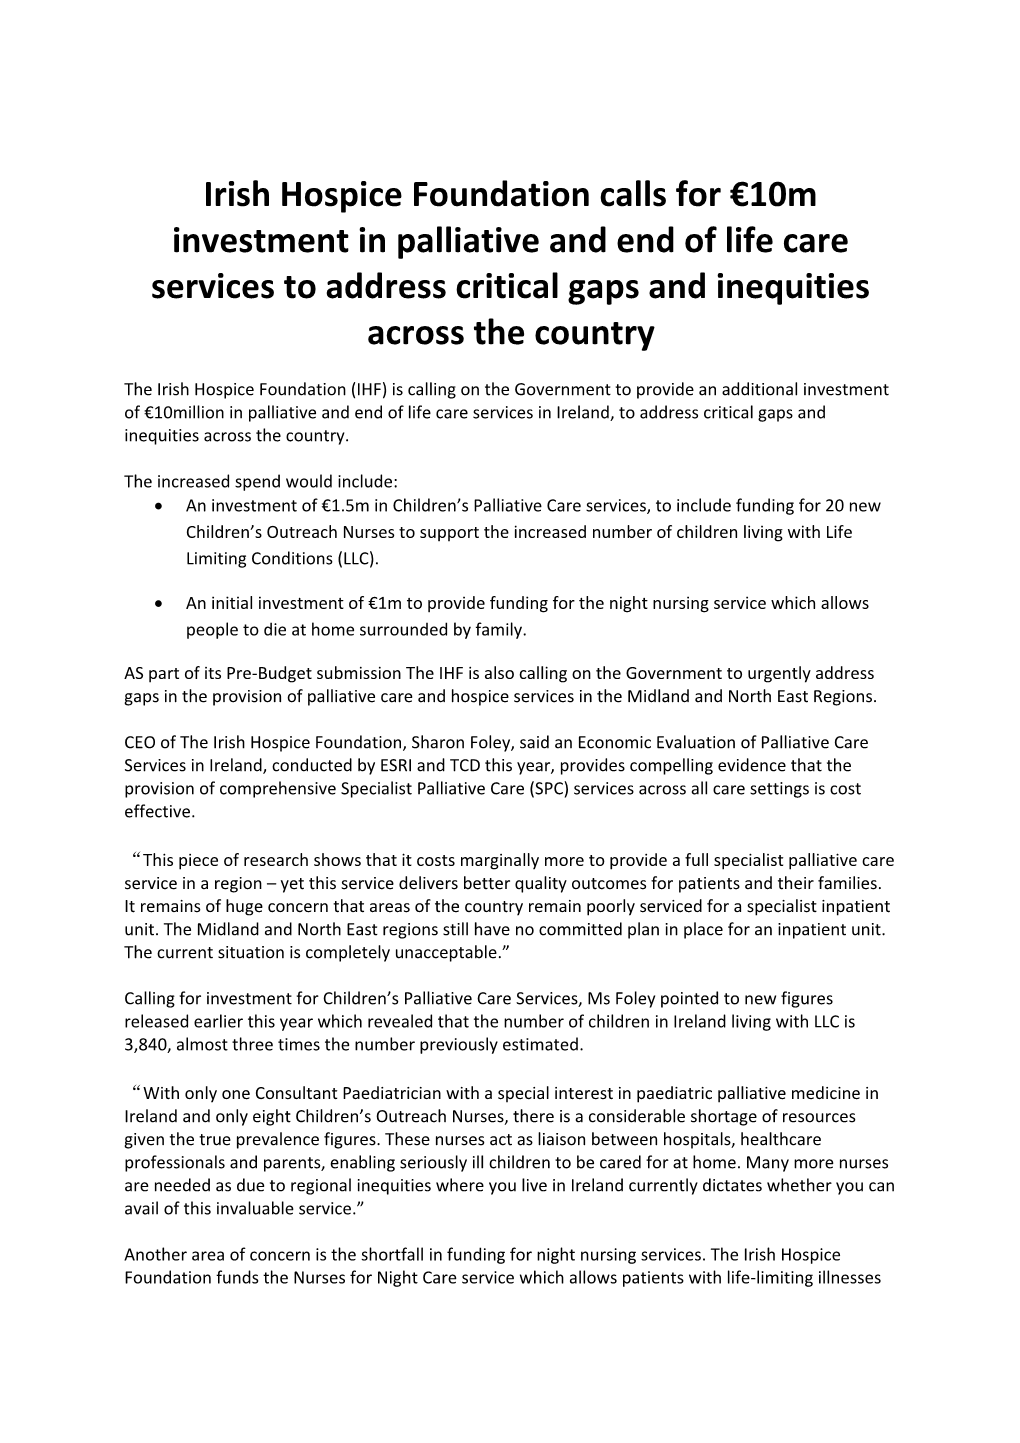 Irish Hospice Foundation Calls for 10M Investment in Palliative and End of Life Care Services